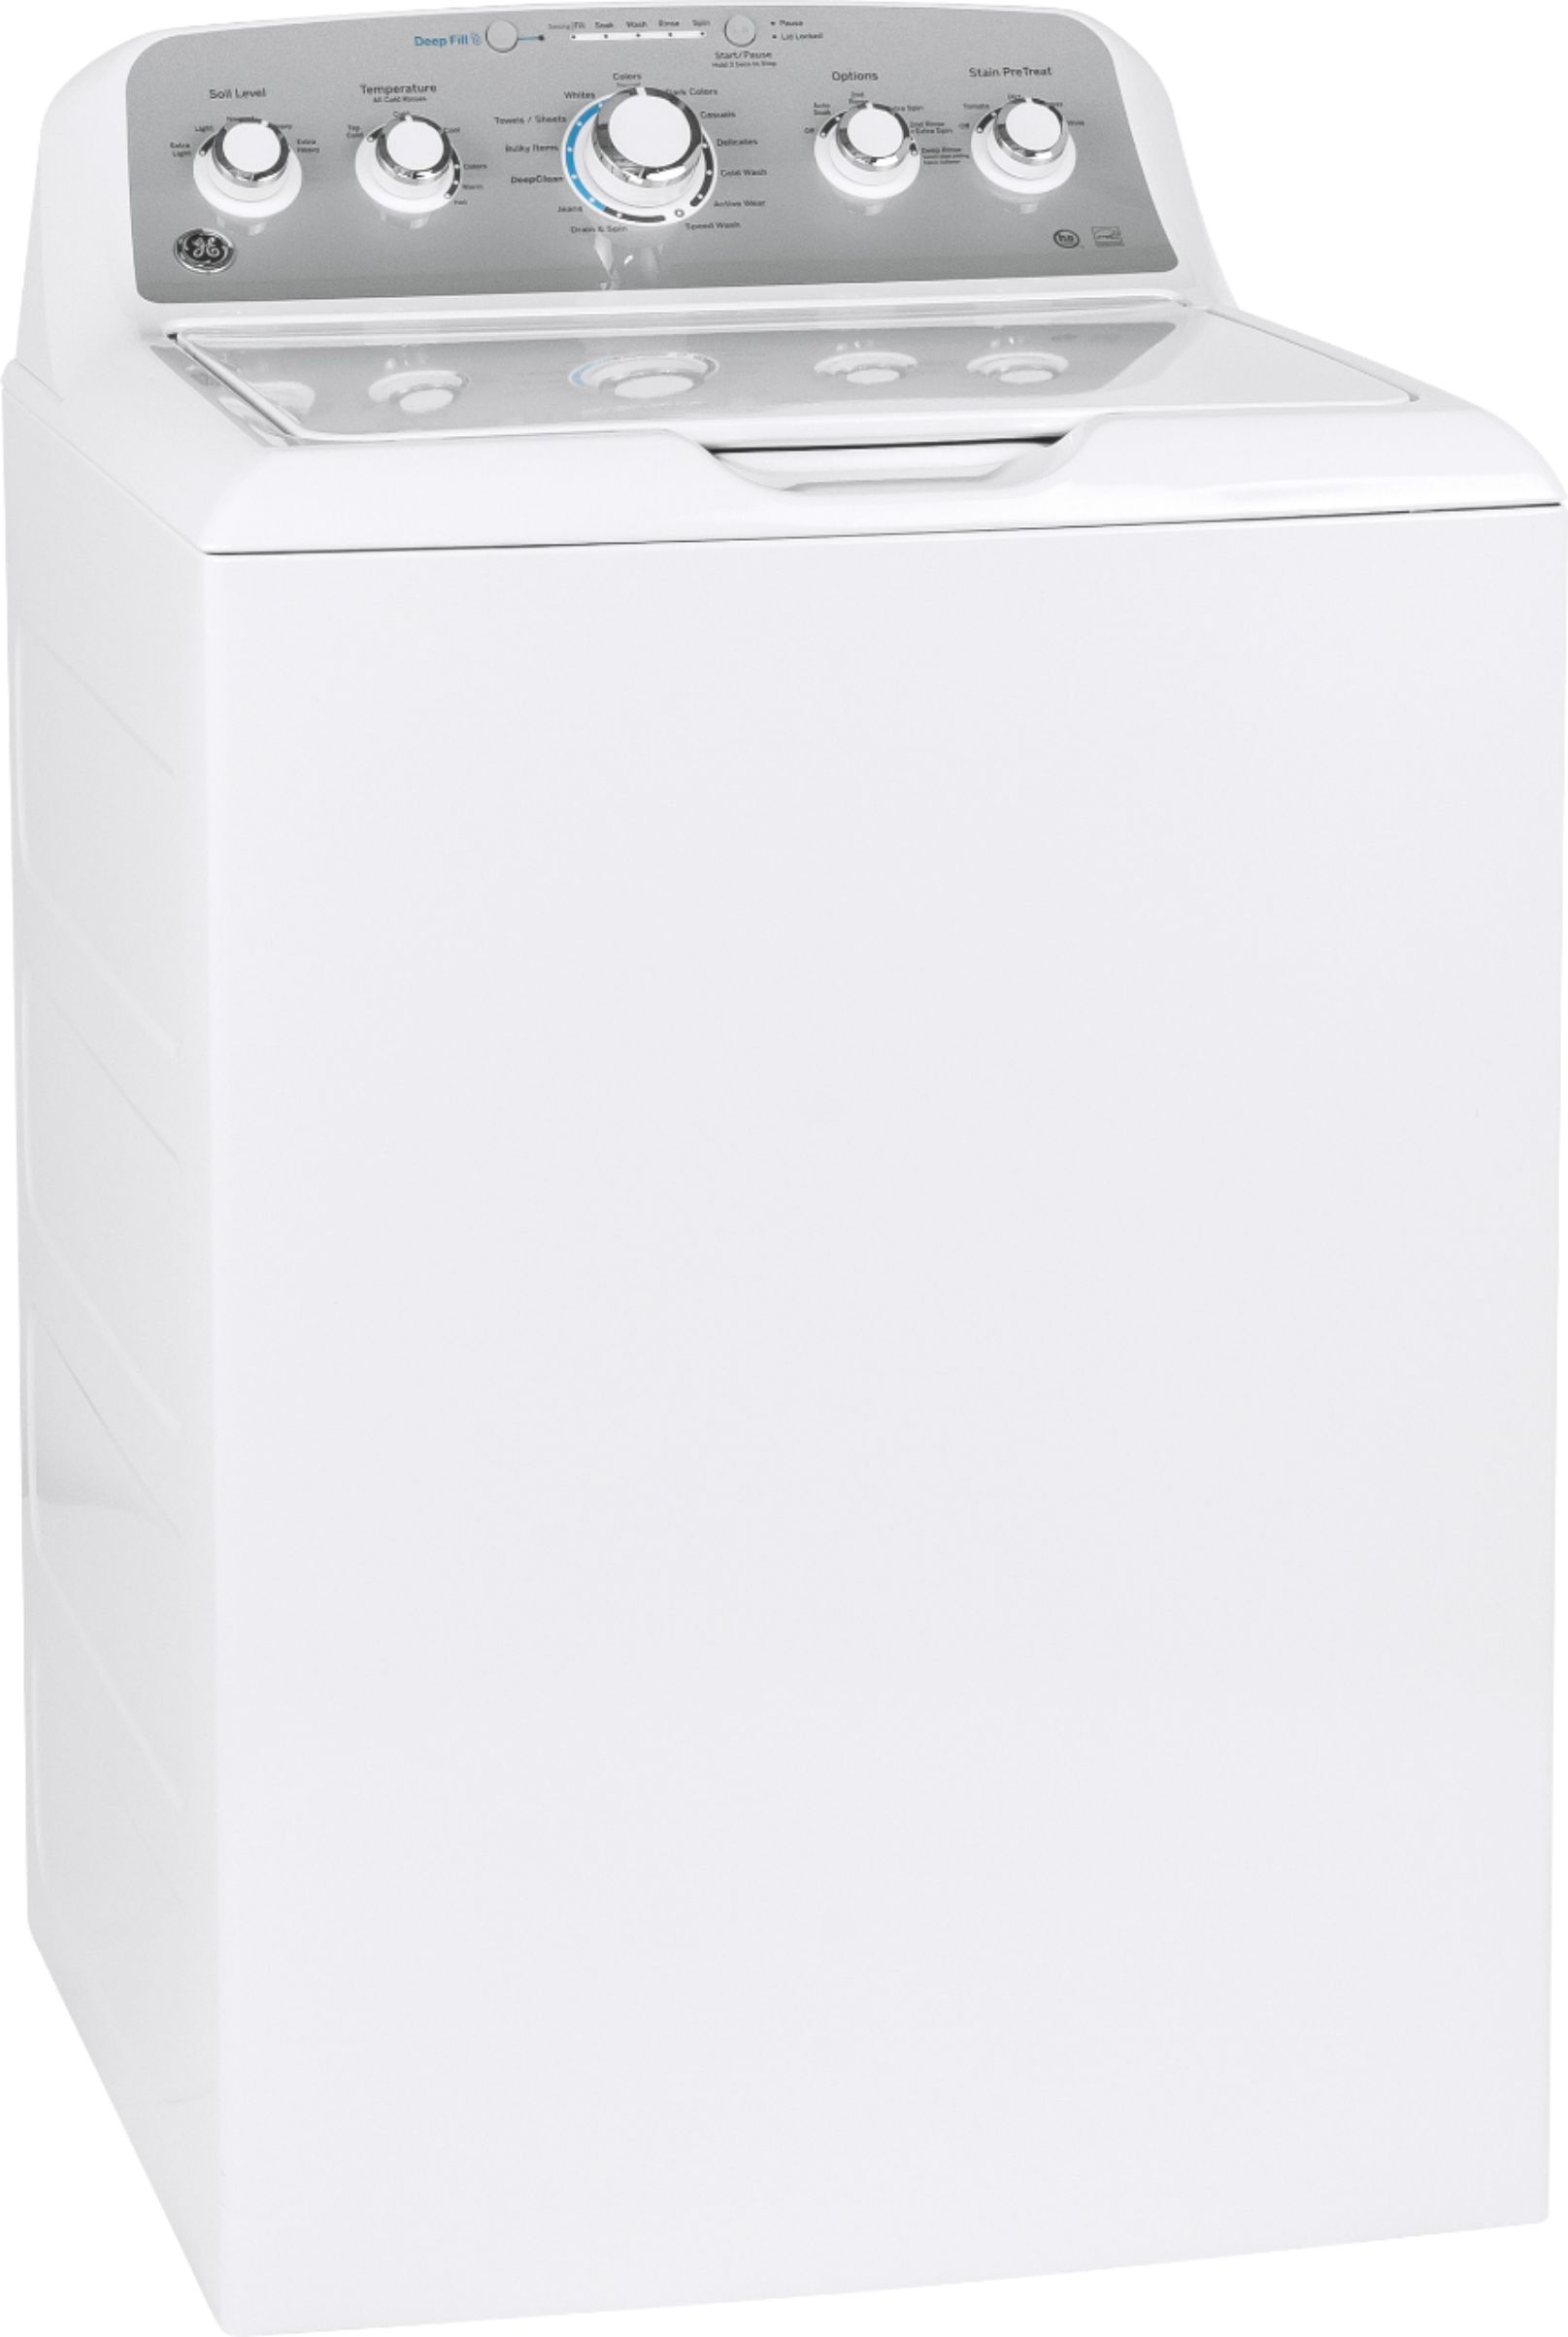 Angle View: GE - 4.6 Cu. Ft.  Top Load Washer - White on White/Silver